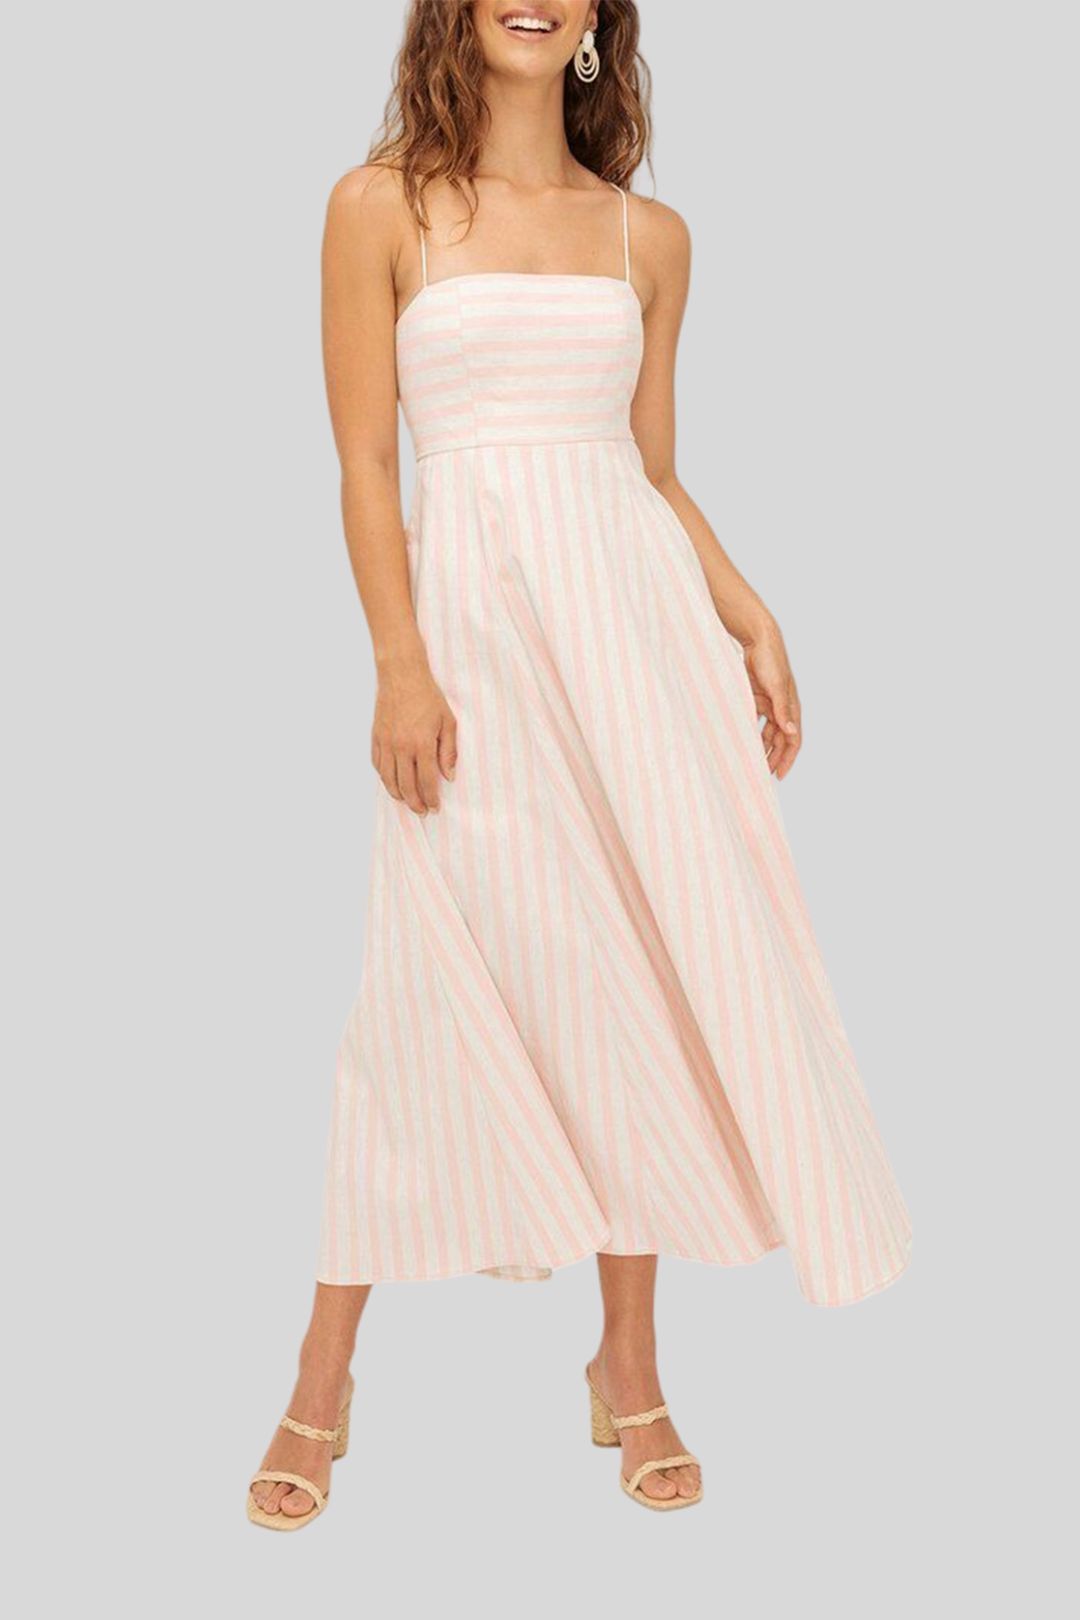 Sheike Ashley Dress in Pink and White Stripe